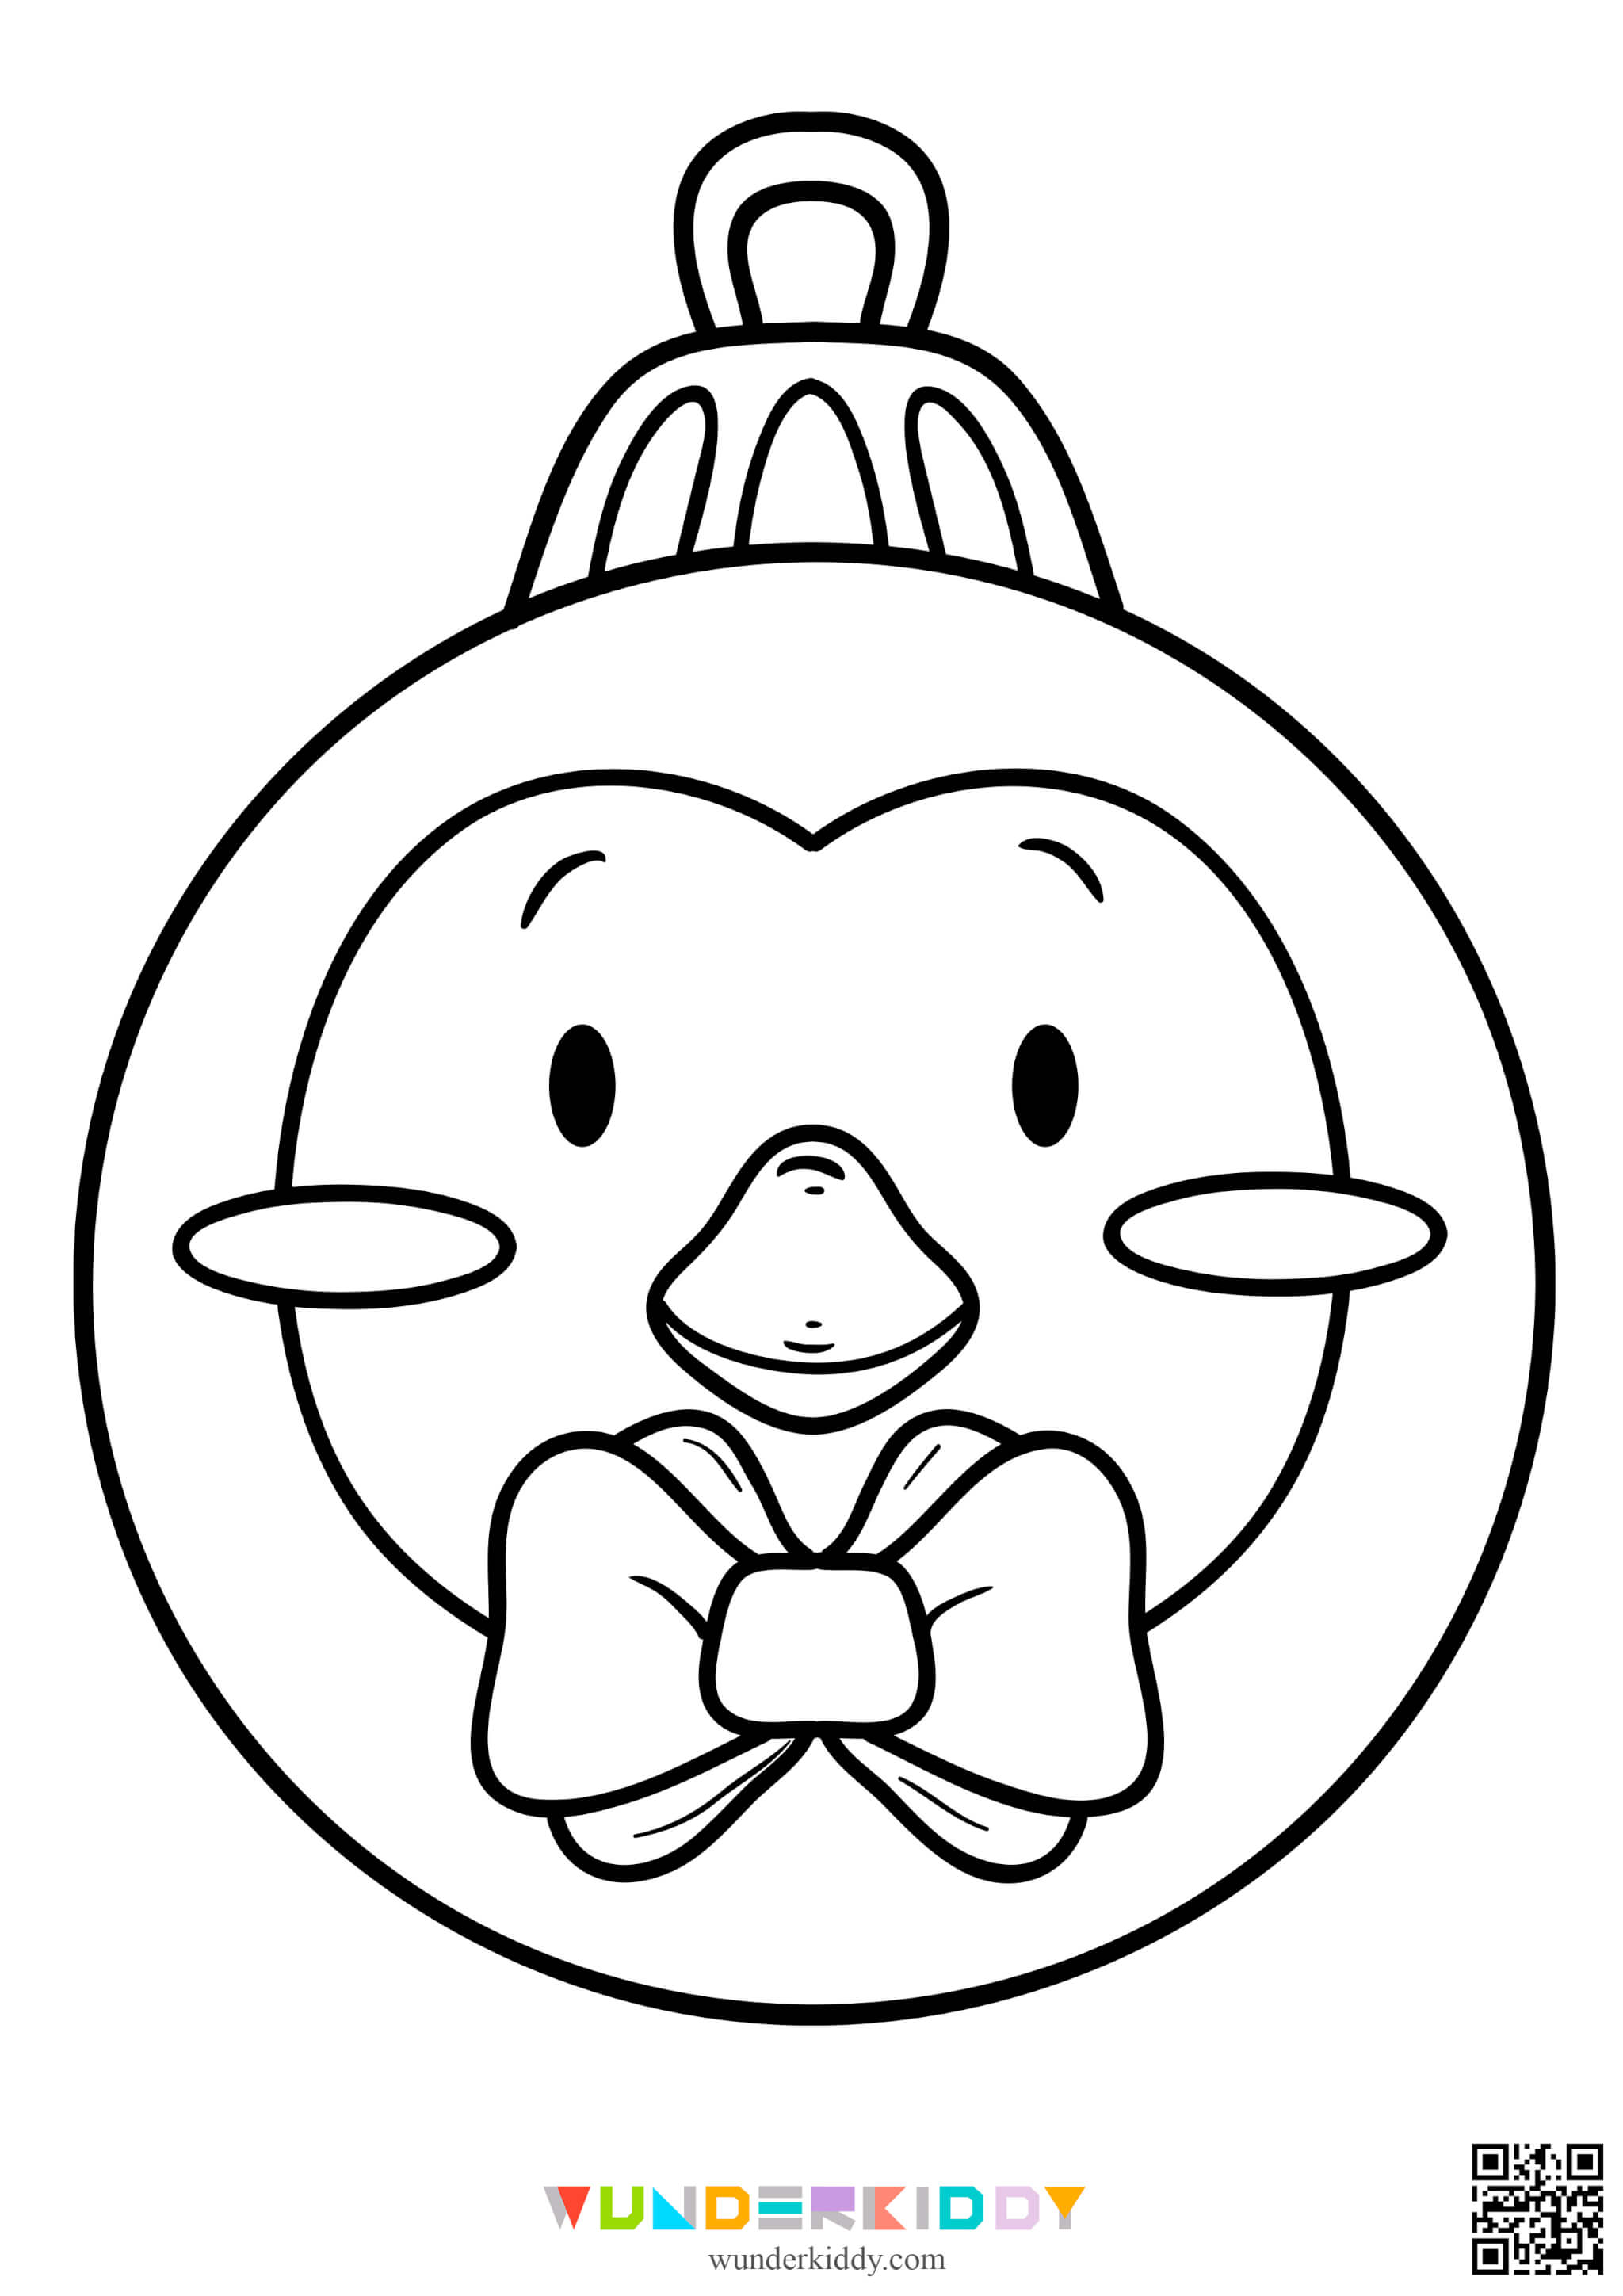 Christmas Ornament Coloring Pages - Image 7